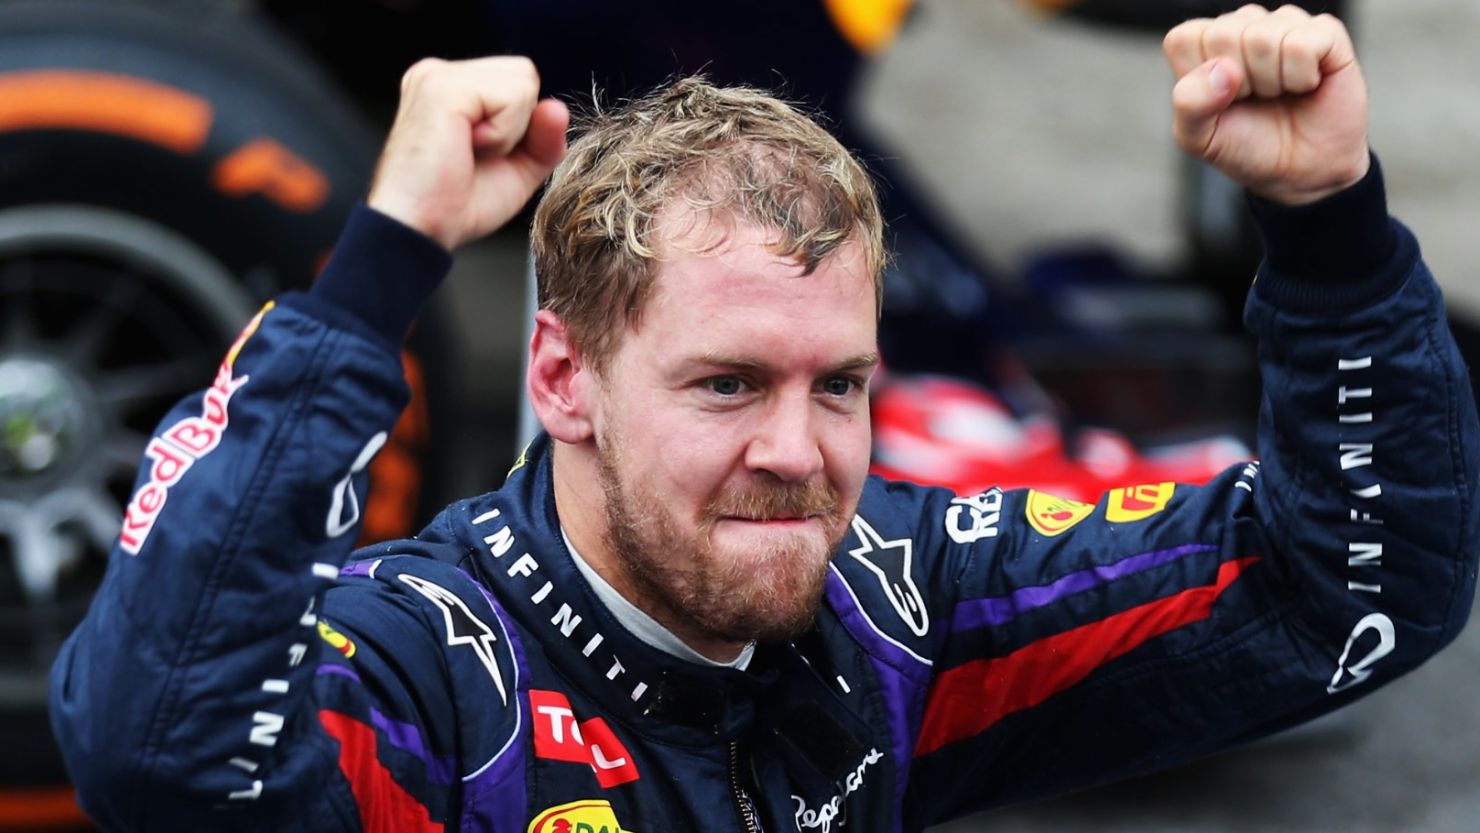 Red Bull's Sebastian Vettel will be aiming to make it five title victories in a row.